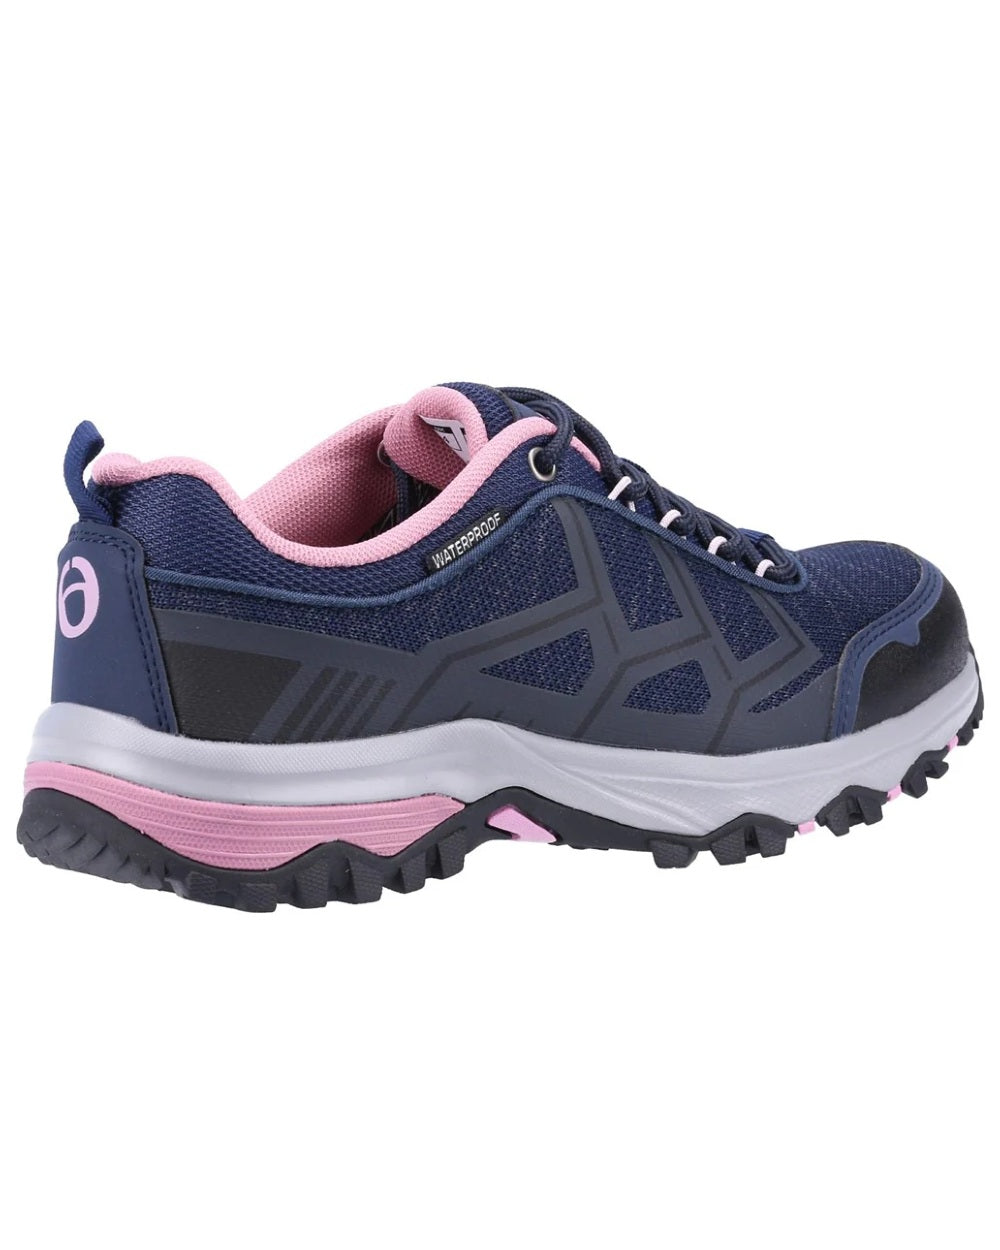 Navy coloured Cotswold Womens Wychwood Recycled Walking Shoes on white background 